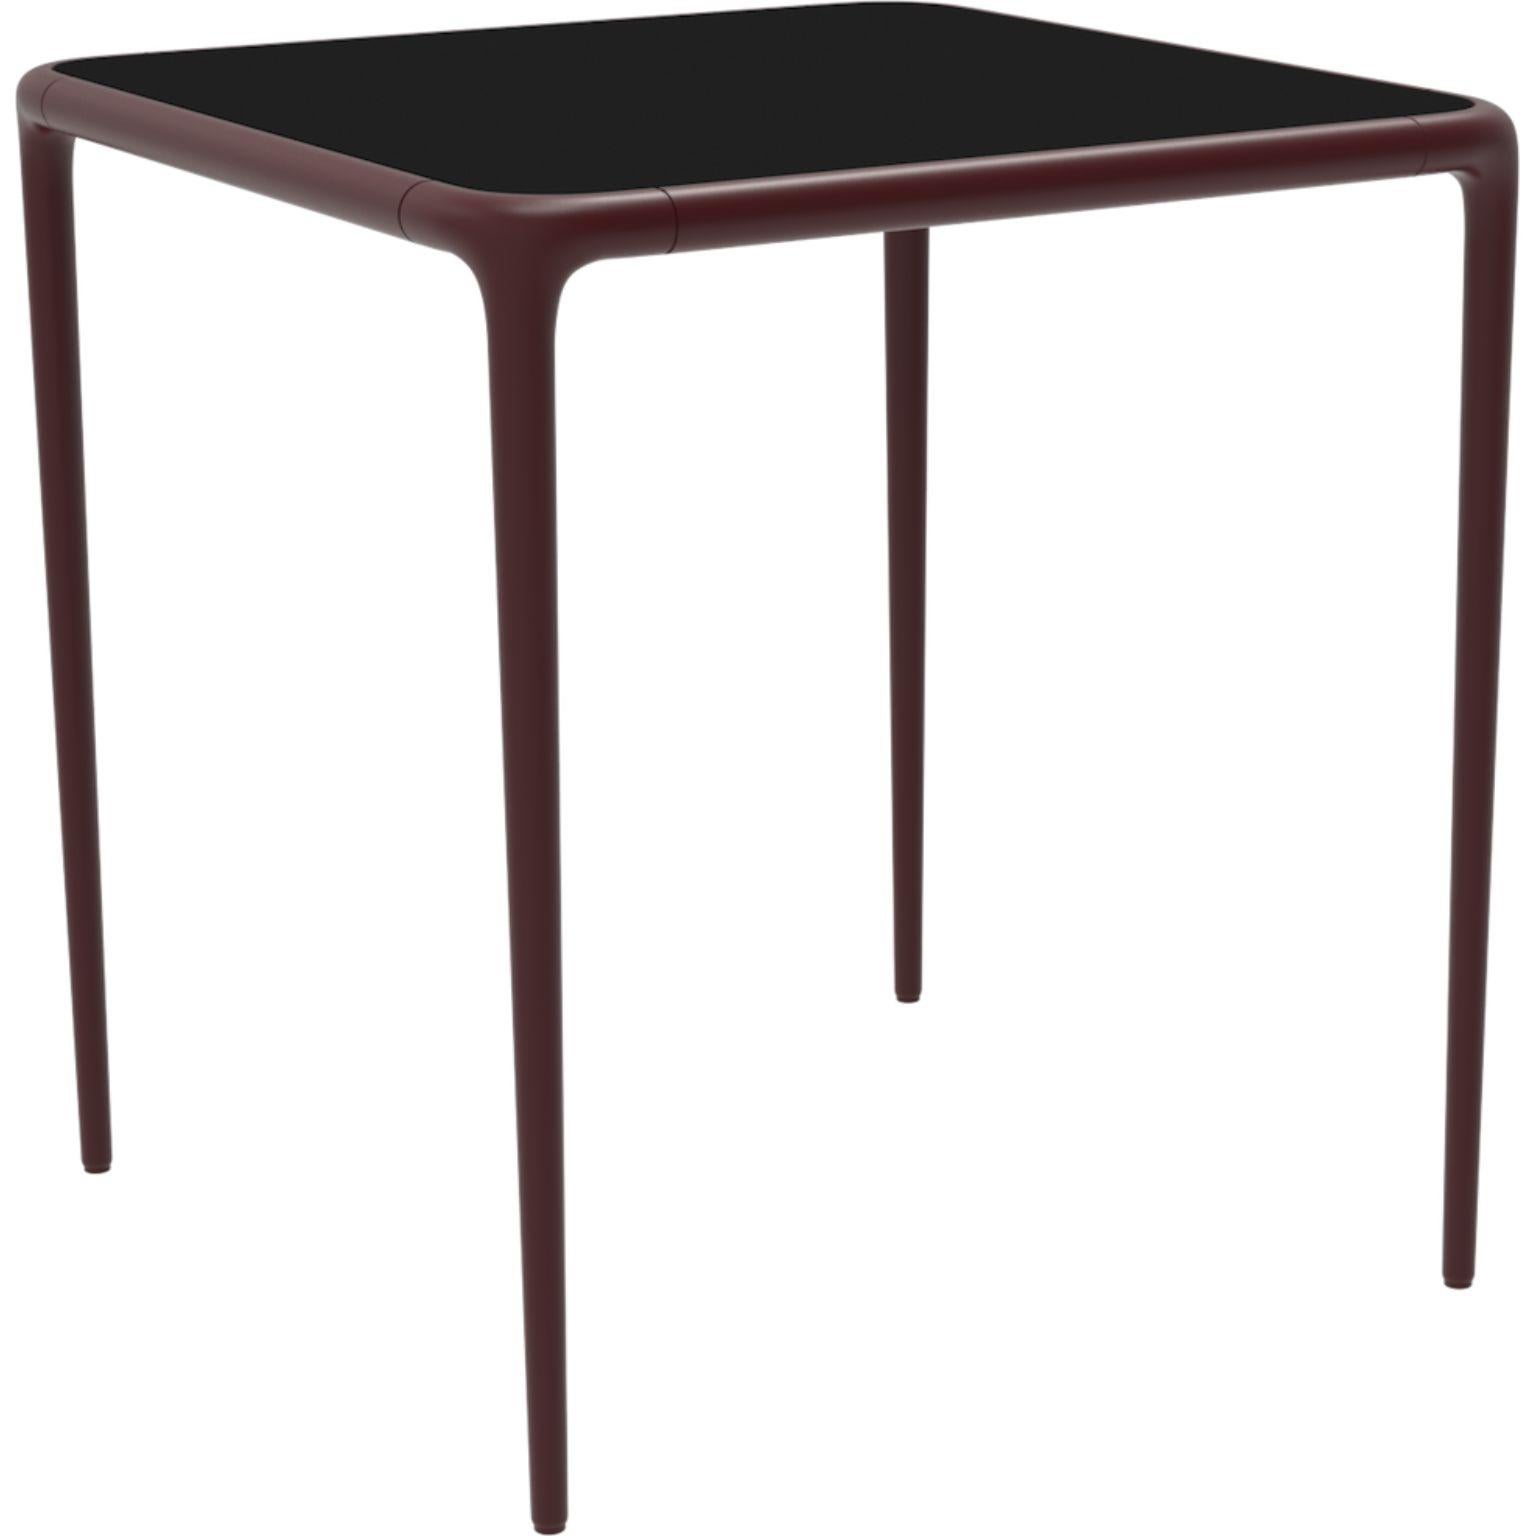 Xaloc Burgundy glass top table 70 by MOWEE
Dimensions: D70 x W70 x H74 cm
Material: Aluminum, tinted tempered glass top.
Also available in different aluminum colors and finishes (HPL Black Edge or Neolith). 

Xaloc synthesizes the lines of